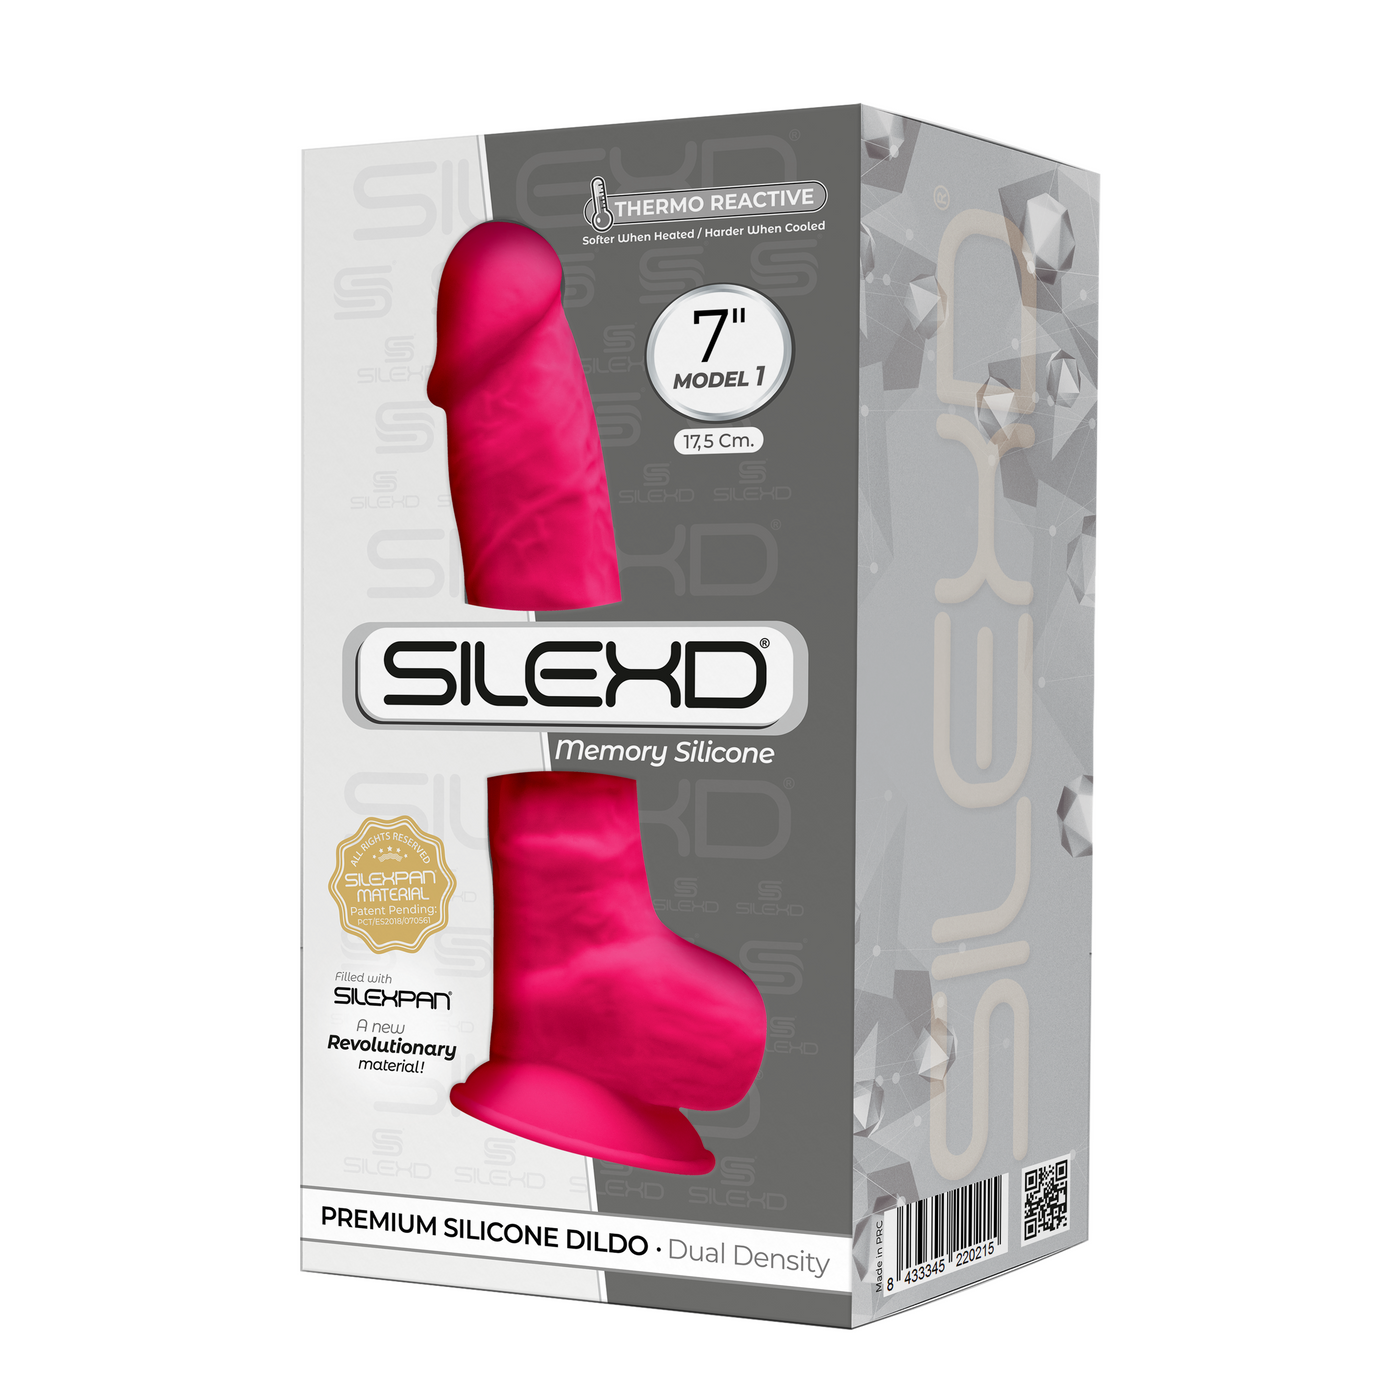 7 inch Realistic Silicone Dual Density Dildo with Suction Cup and Balls